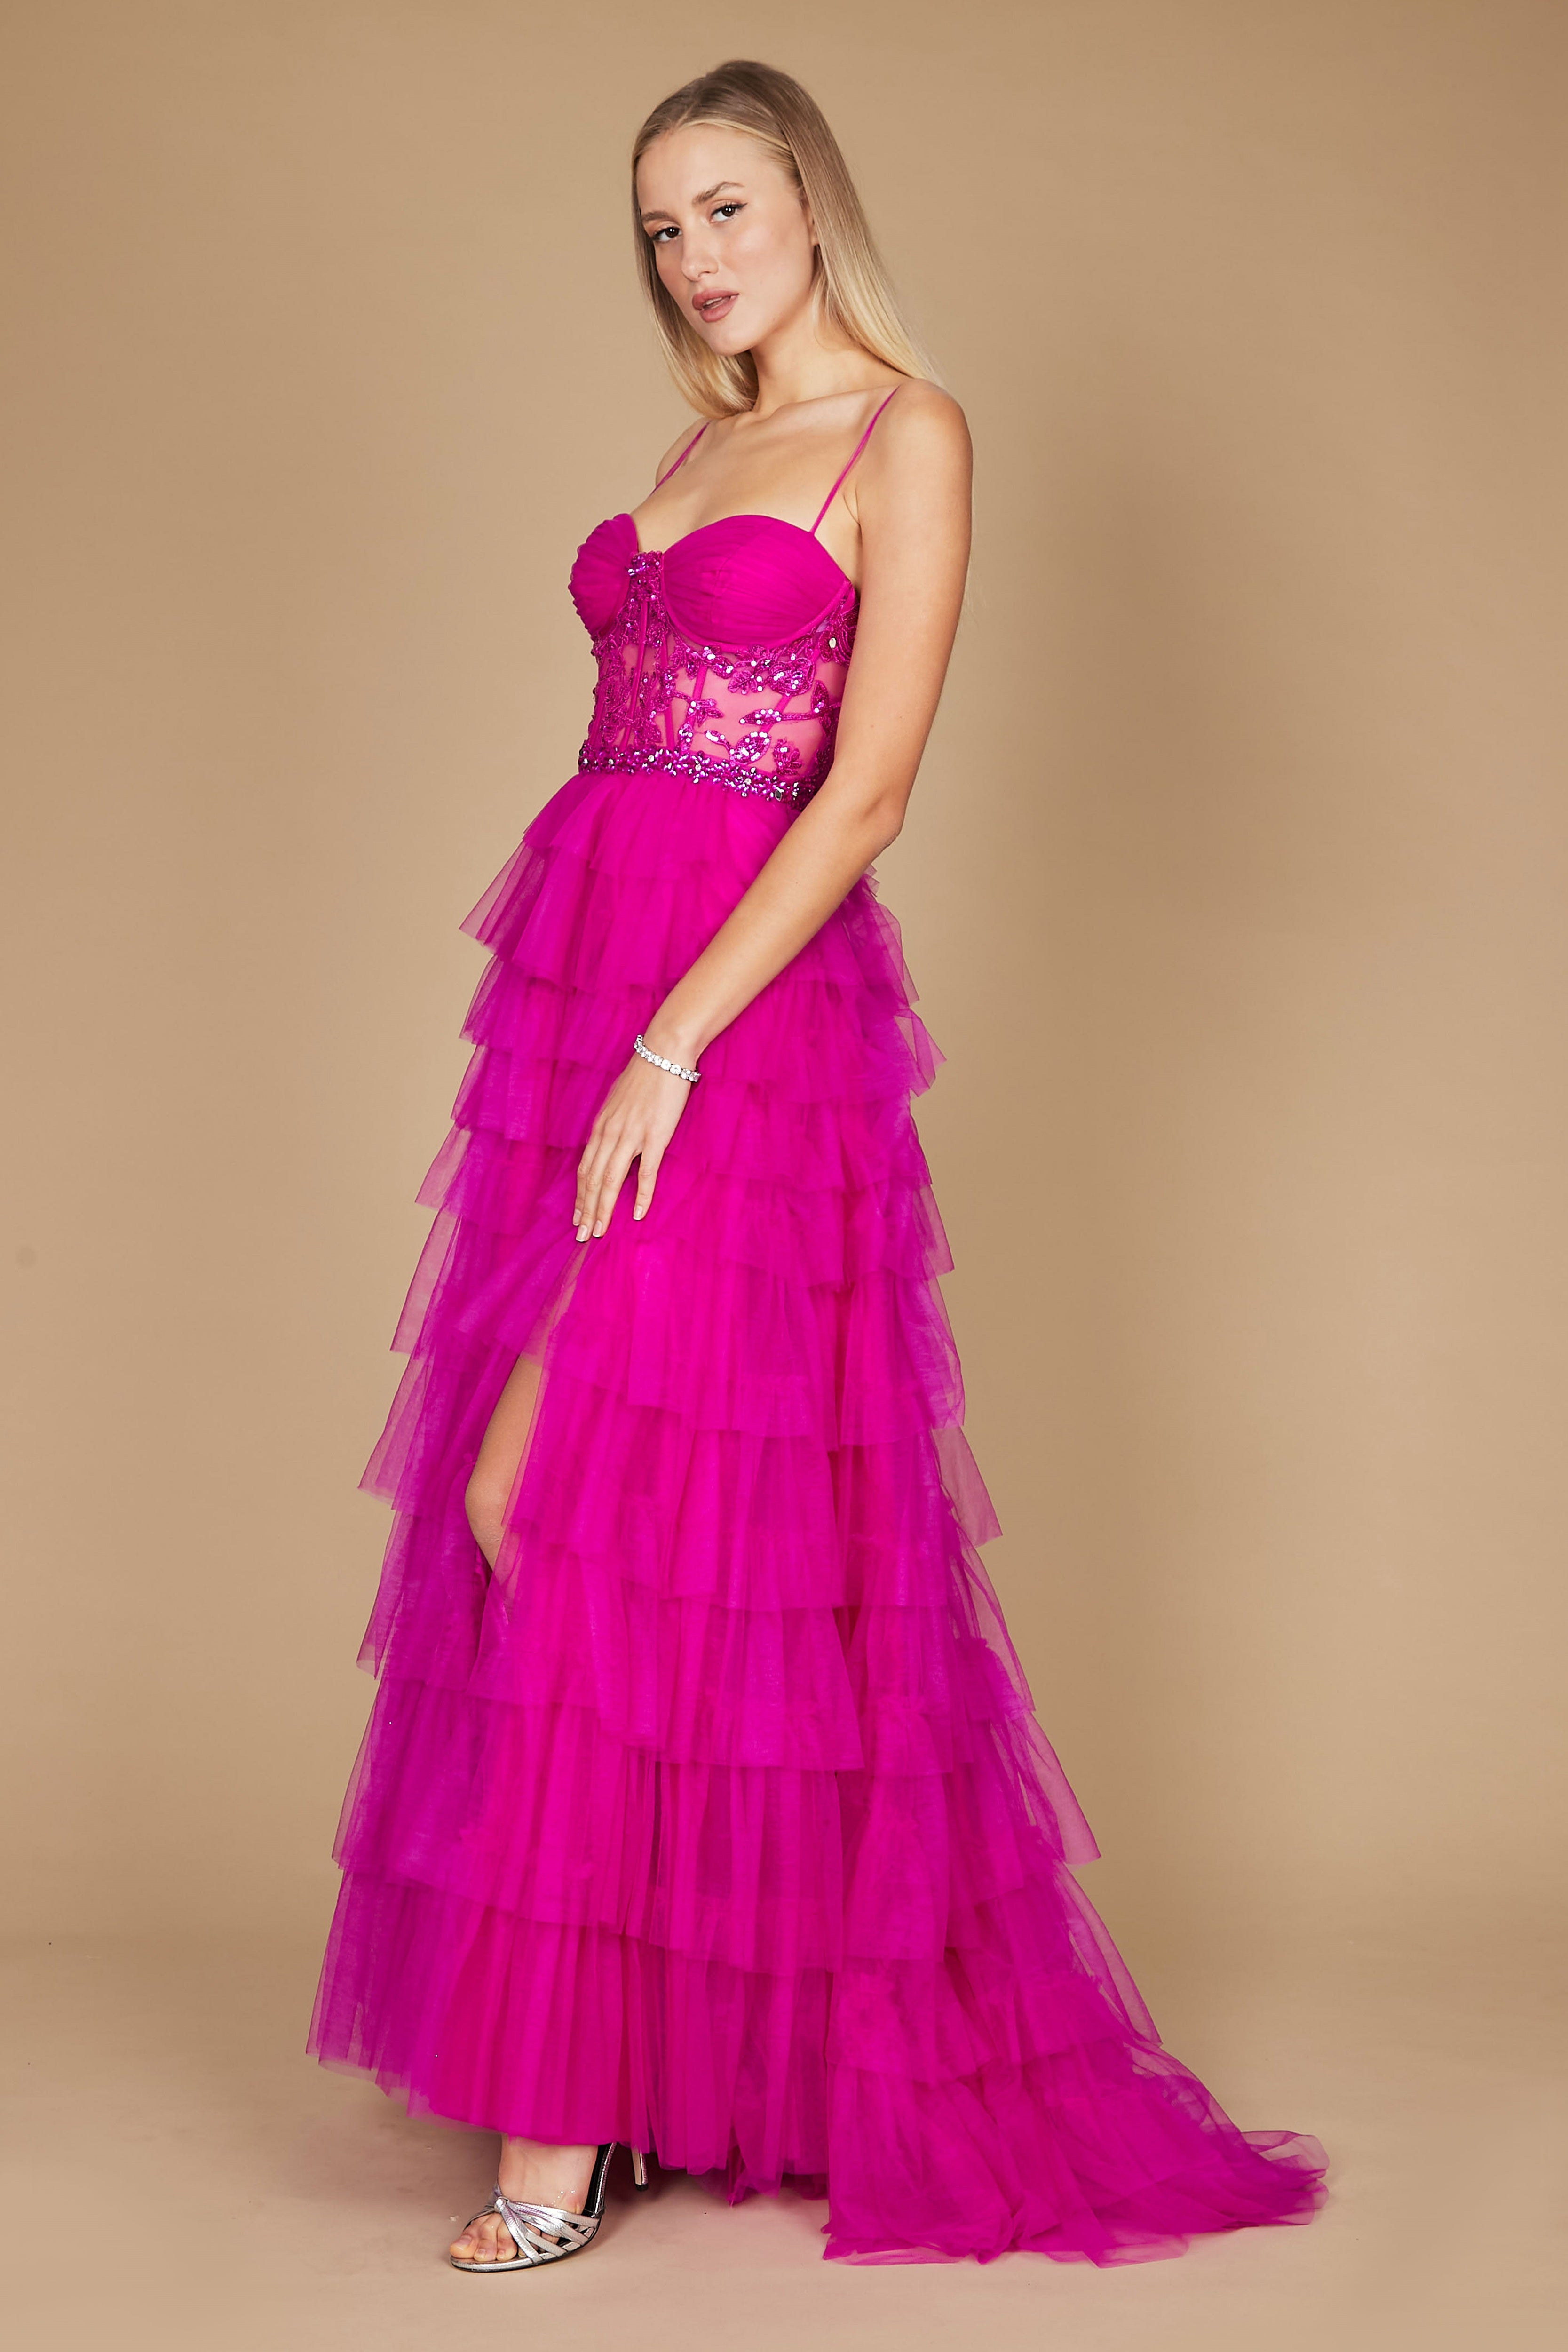 Robe De Soiree Fuchsia Pink Ball Gown Prom Dresses Appliques Beaded  Princess Puffy Sweetheart Party on Luulla